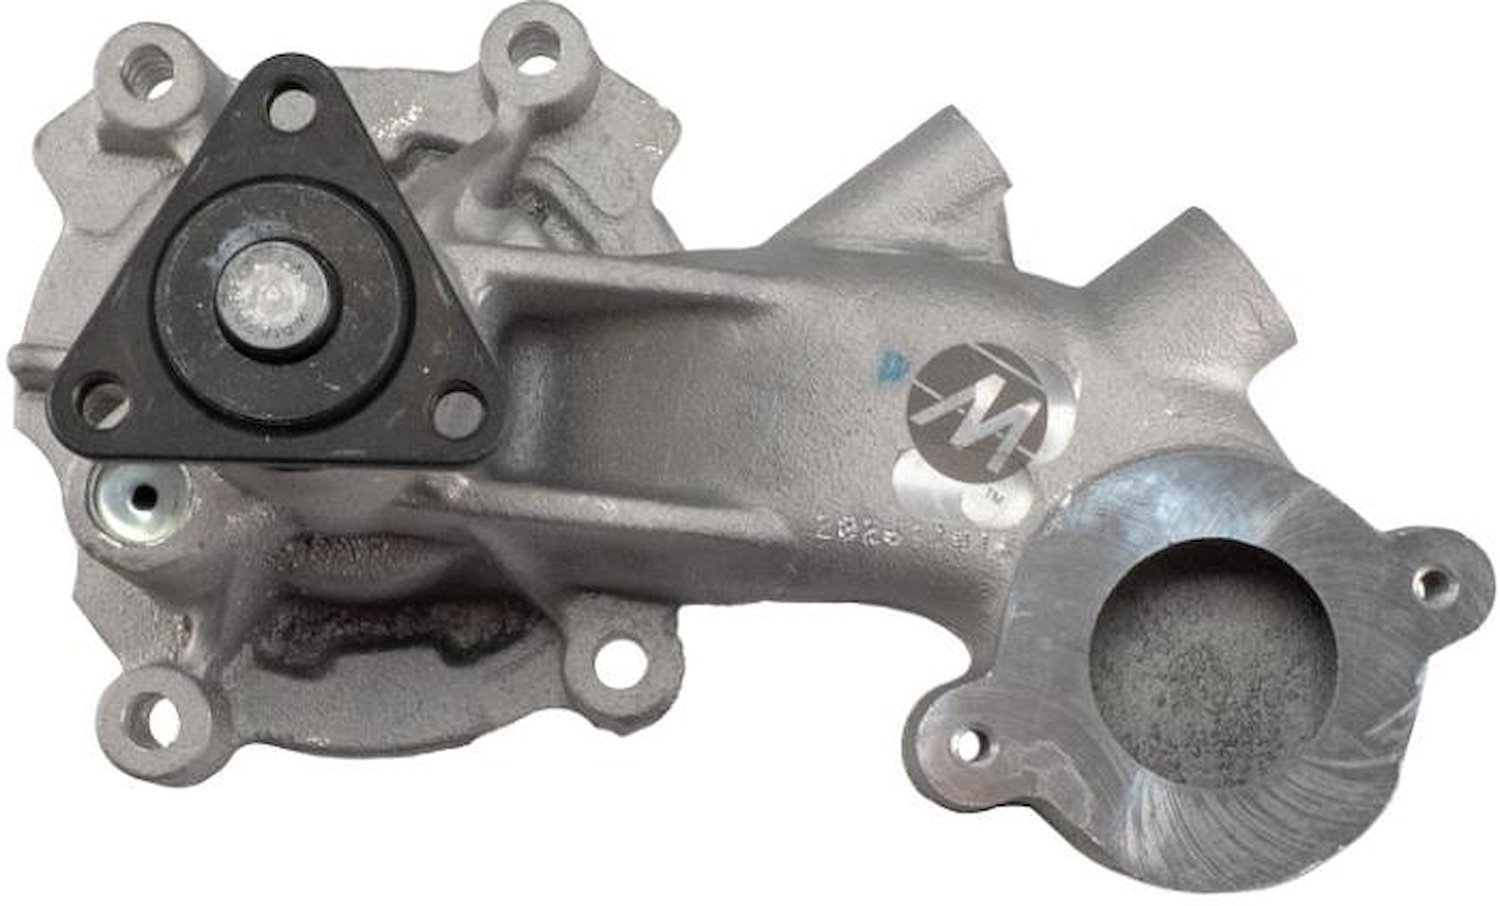 Water Pump for Ford 5.0 DOHC Coyote V8 Engines